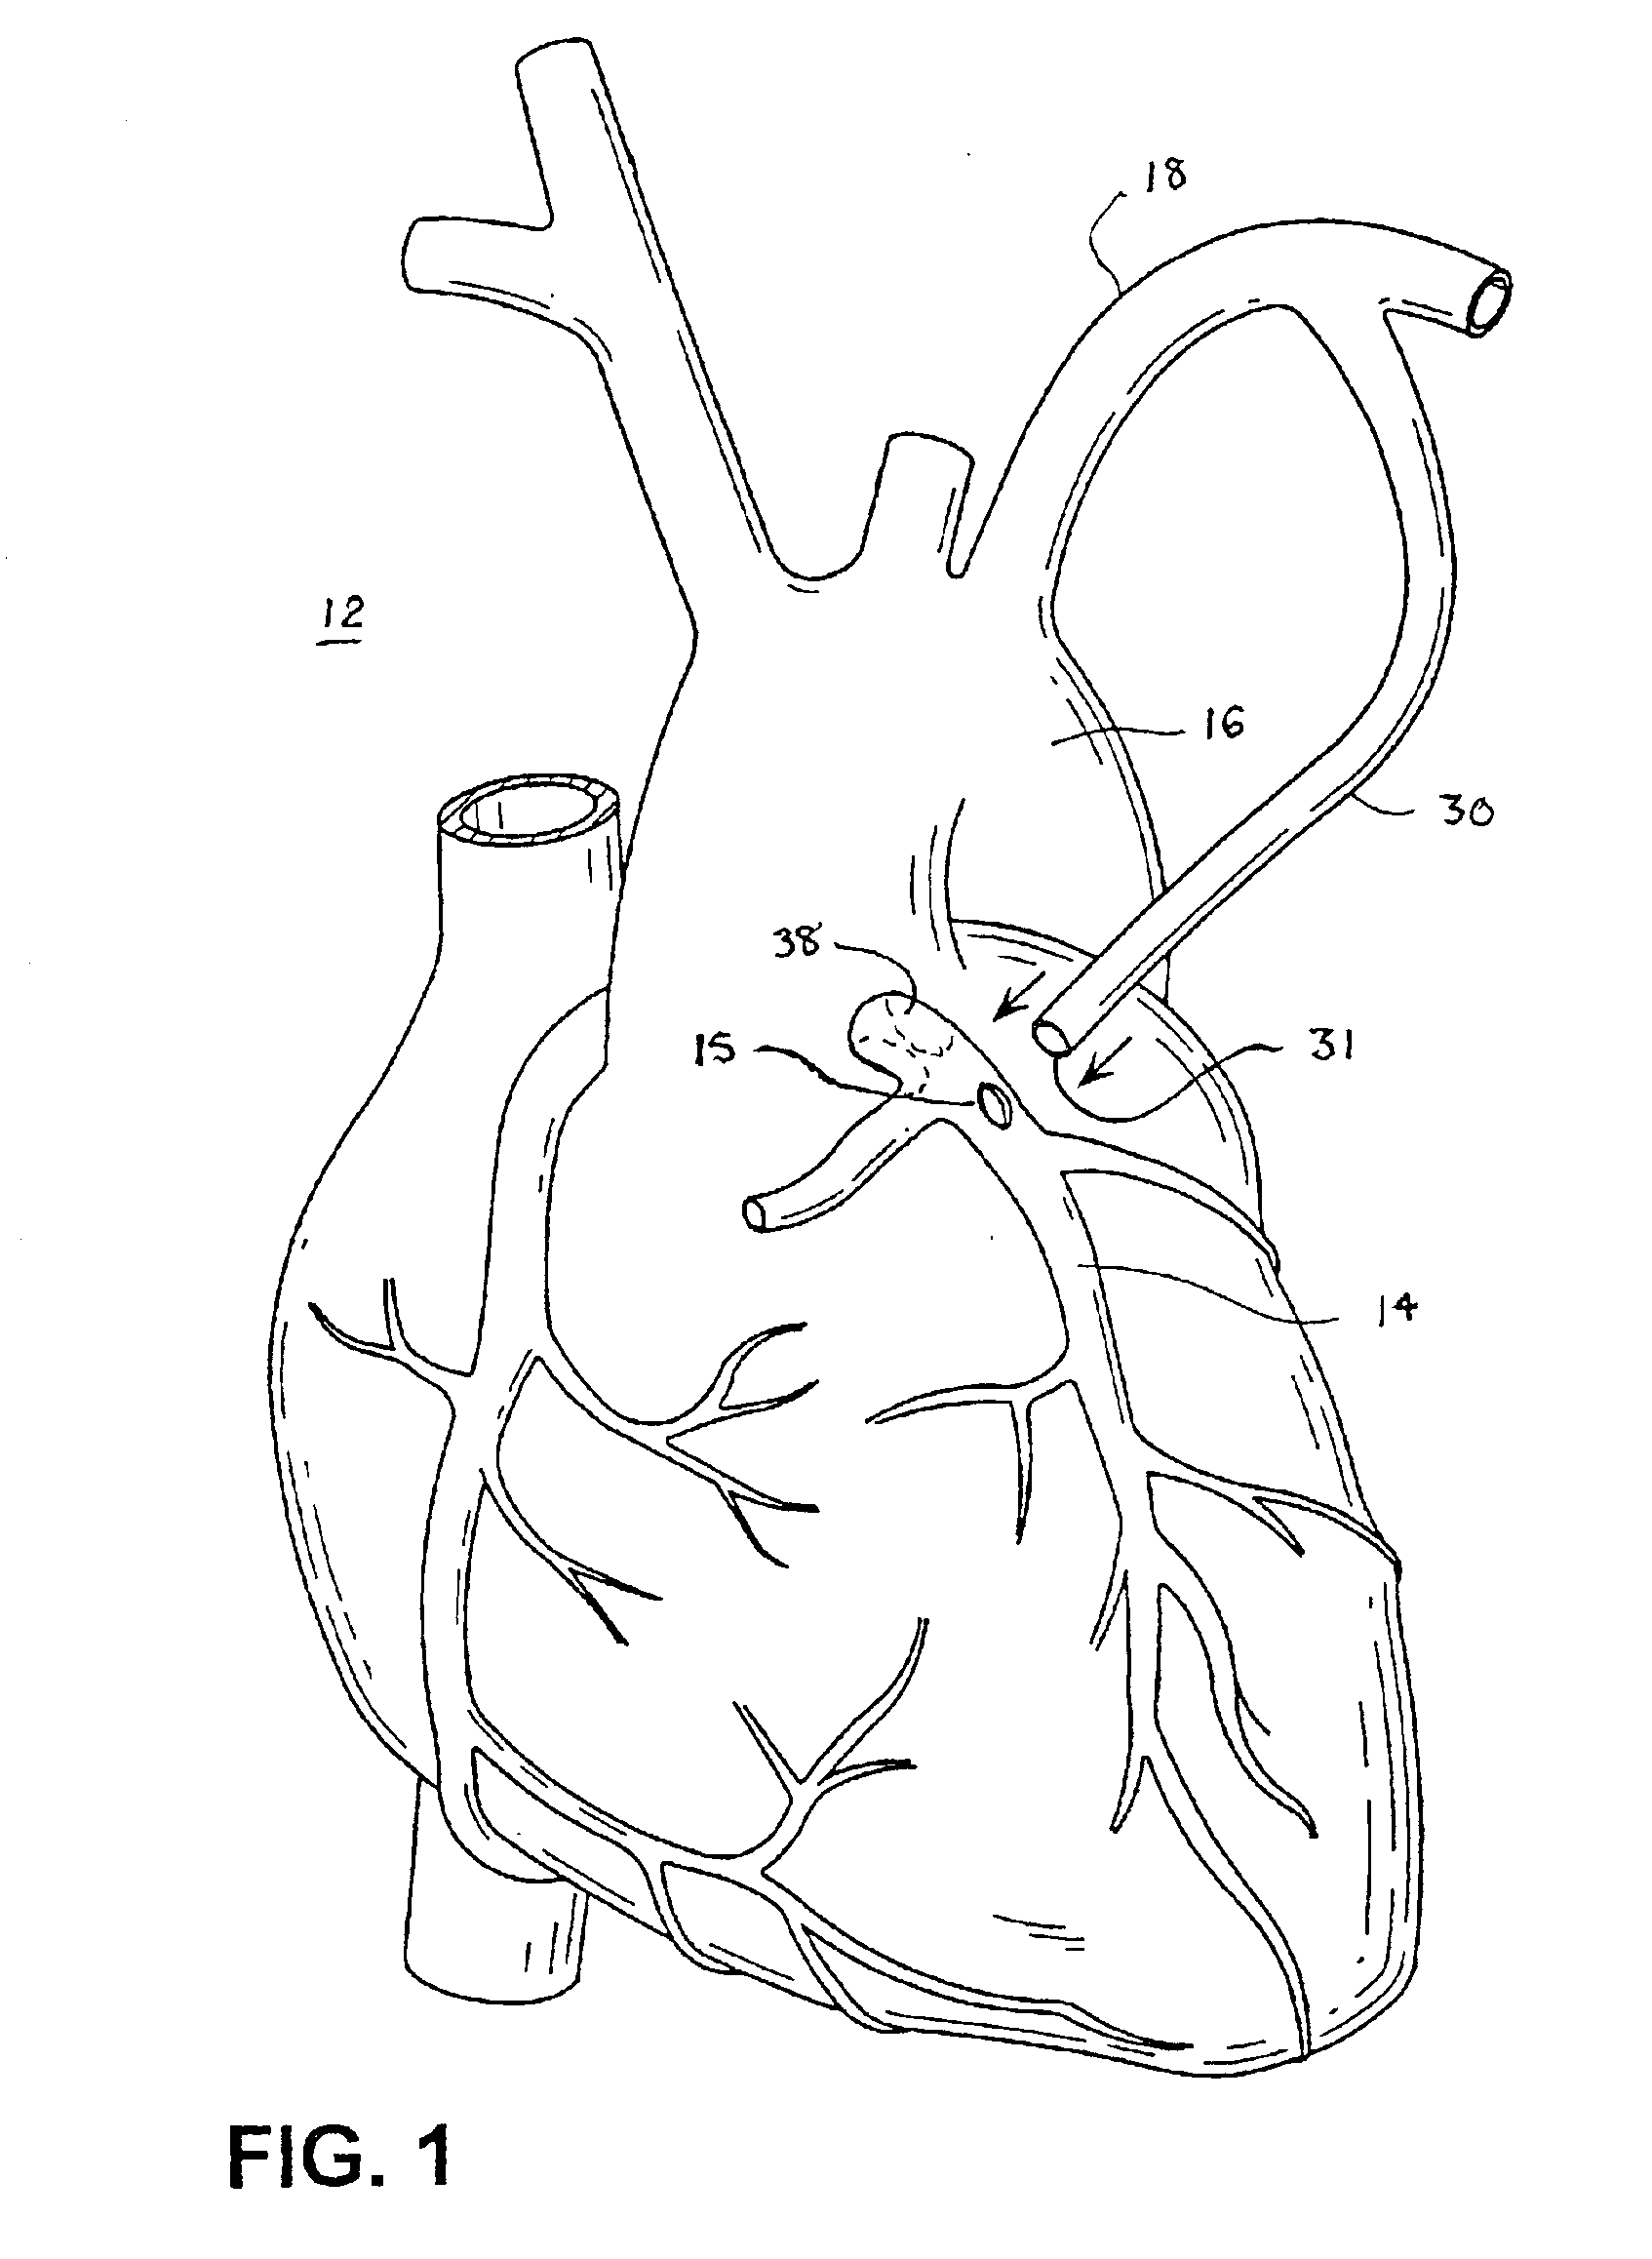 Electrosurgical methods and apparatus for making precise incisions in body vessels